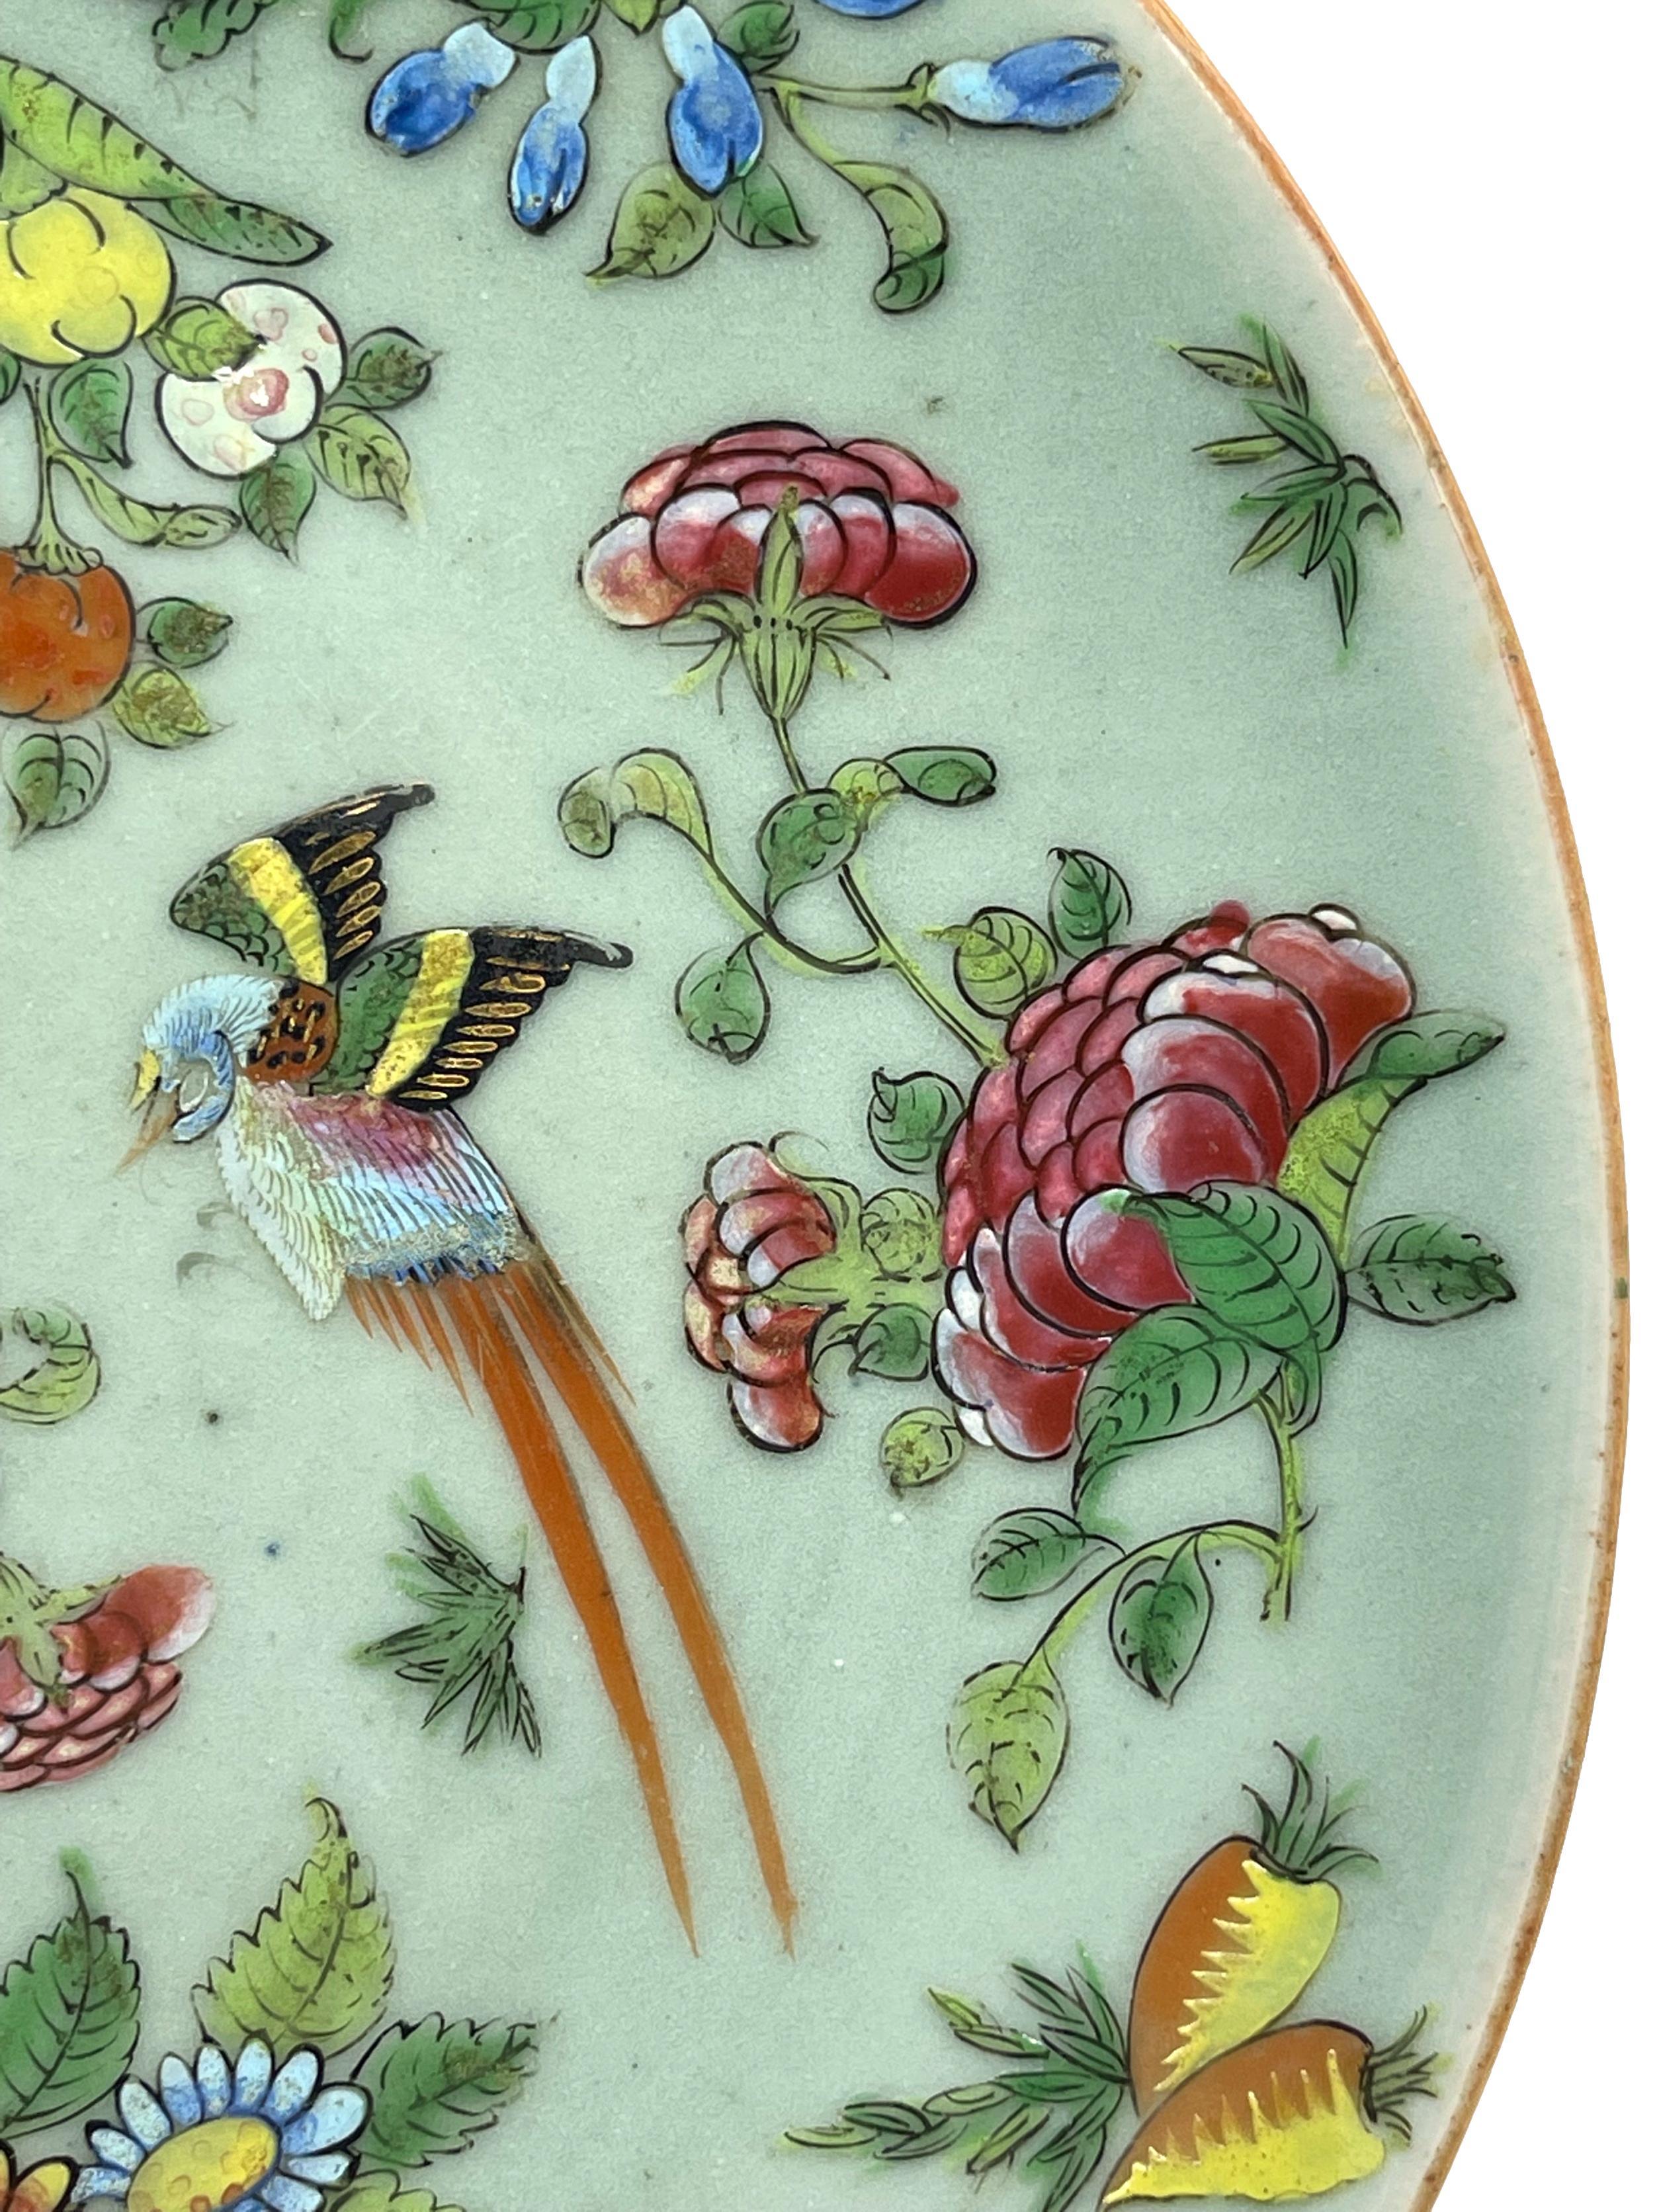 19th Century Chinese Celadon Famille Rose Plate, Canton, Qing Dynasty, ca. 1850